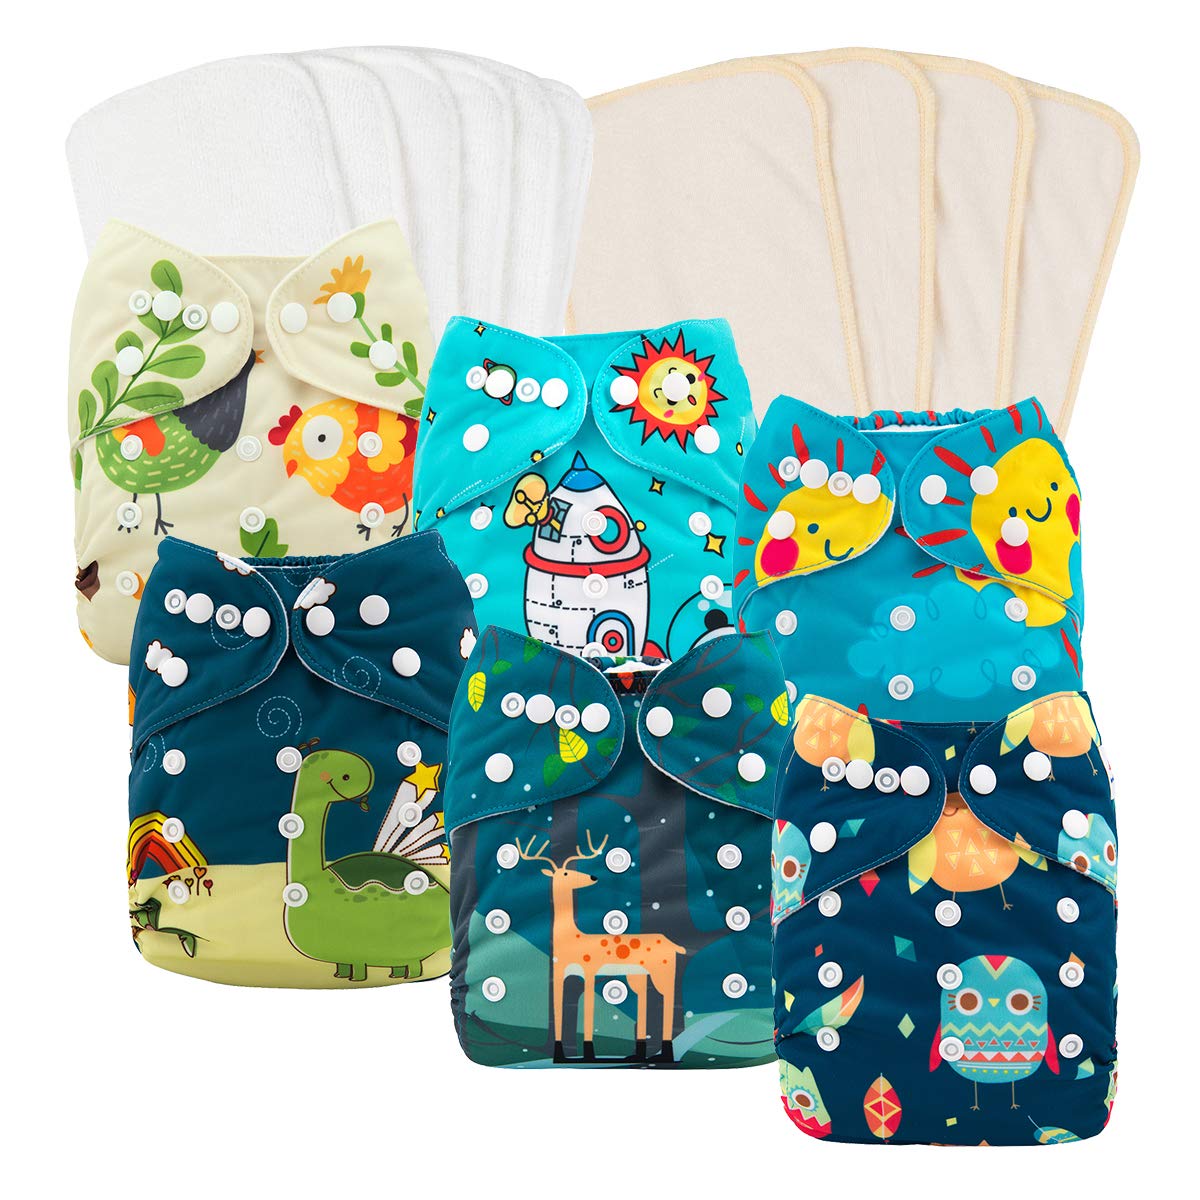 babygoal Reusable Cloth Diapers for Baby Boys, One Size Adjustable Washable  Pocket Nappy Covers 6 Pack+ 6pcs Microfiber Inserts+4pcs Bamboo Inserts  6FB15 Chick,deer,dinasaur